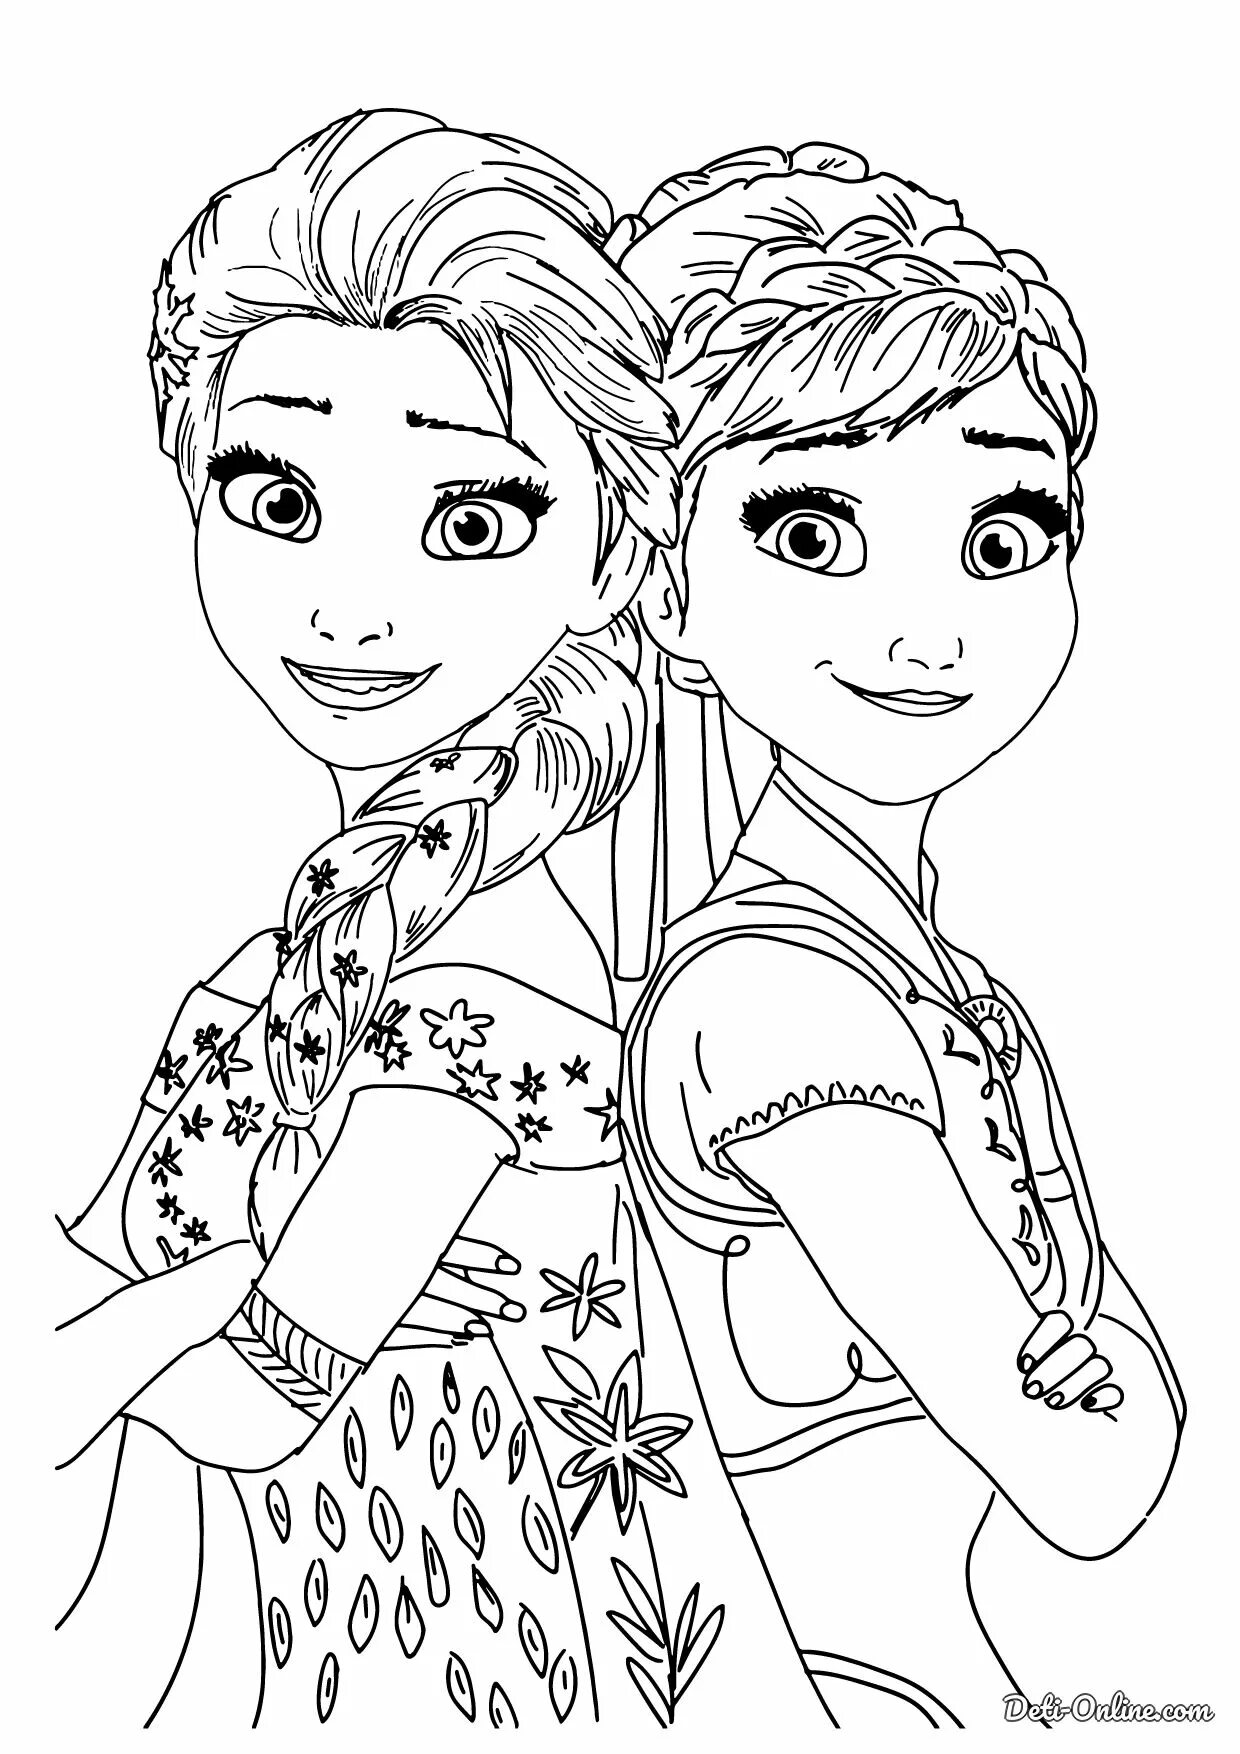 Surreal coloring page 2 for girls